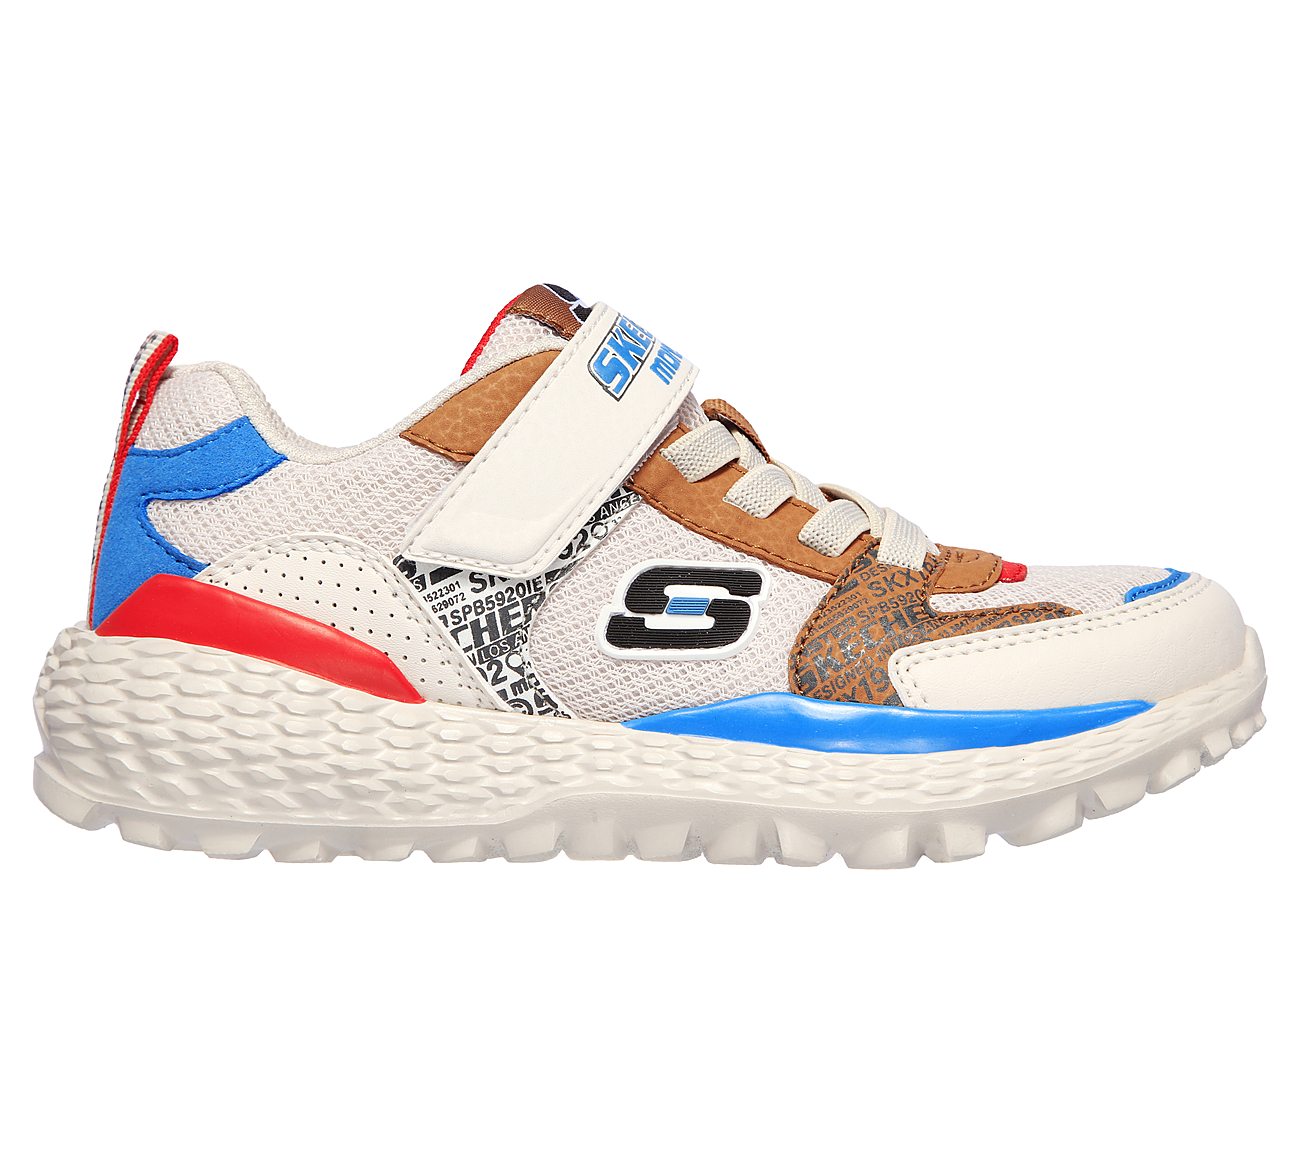 SKECHERS MONSTER-KROVON, TAUPE/MULTI Footwear Right View